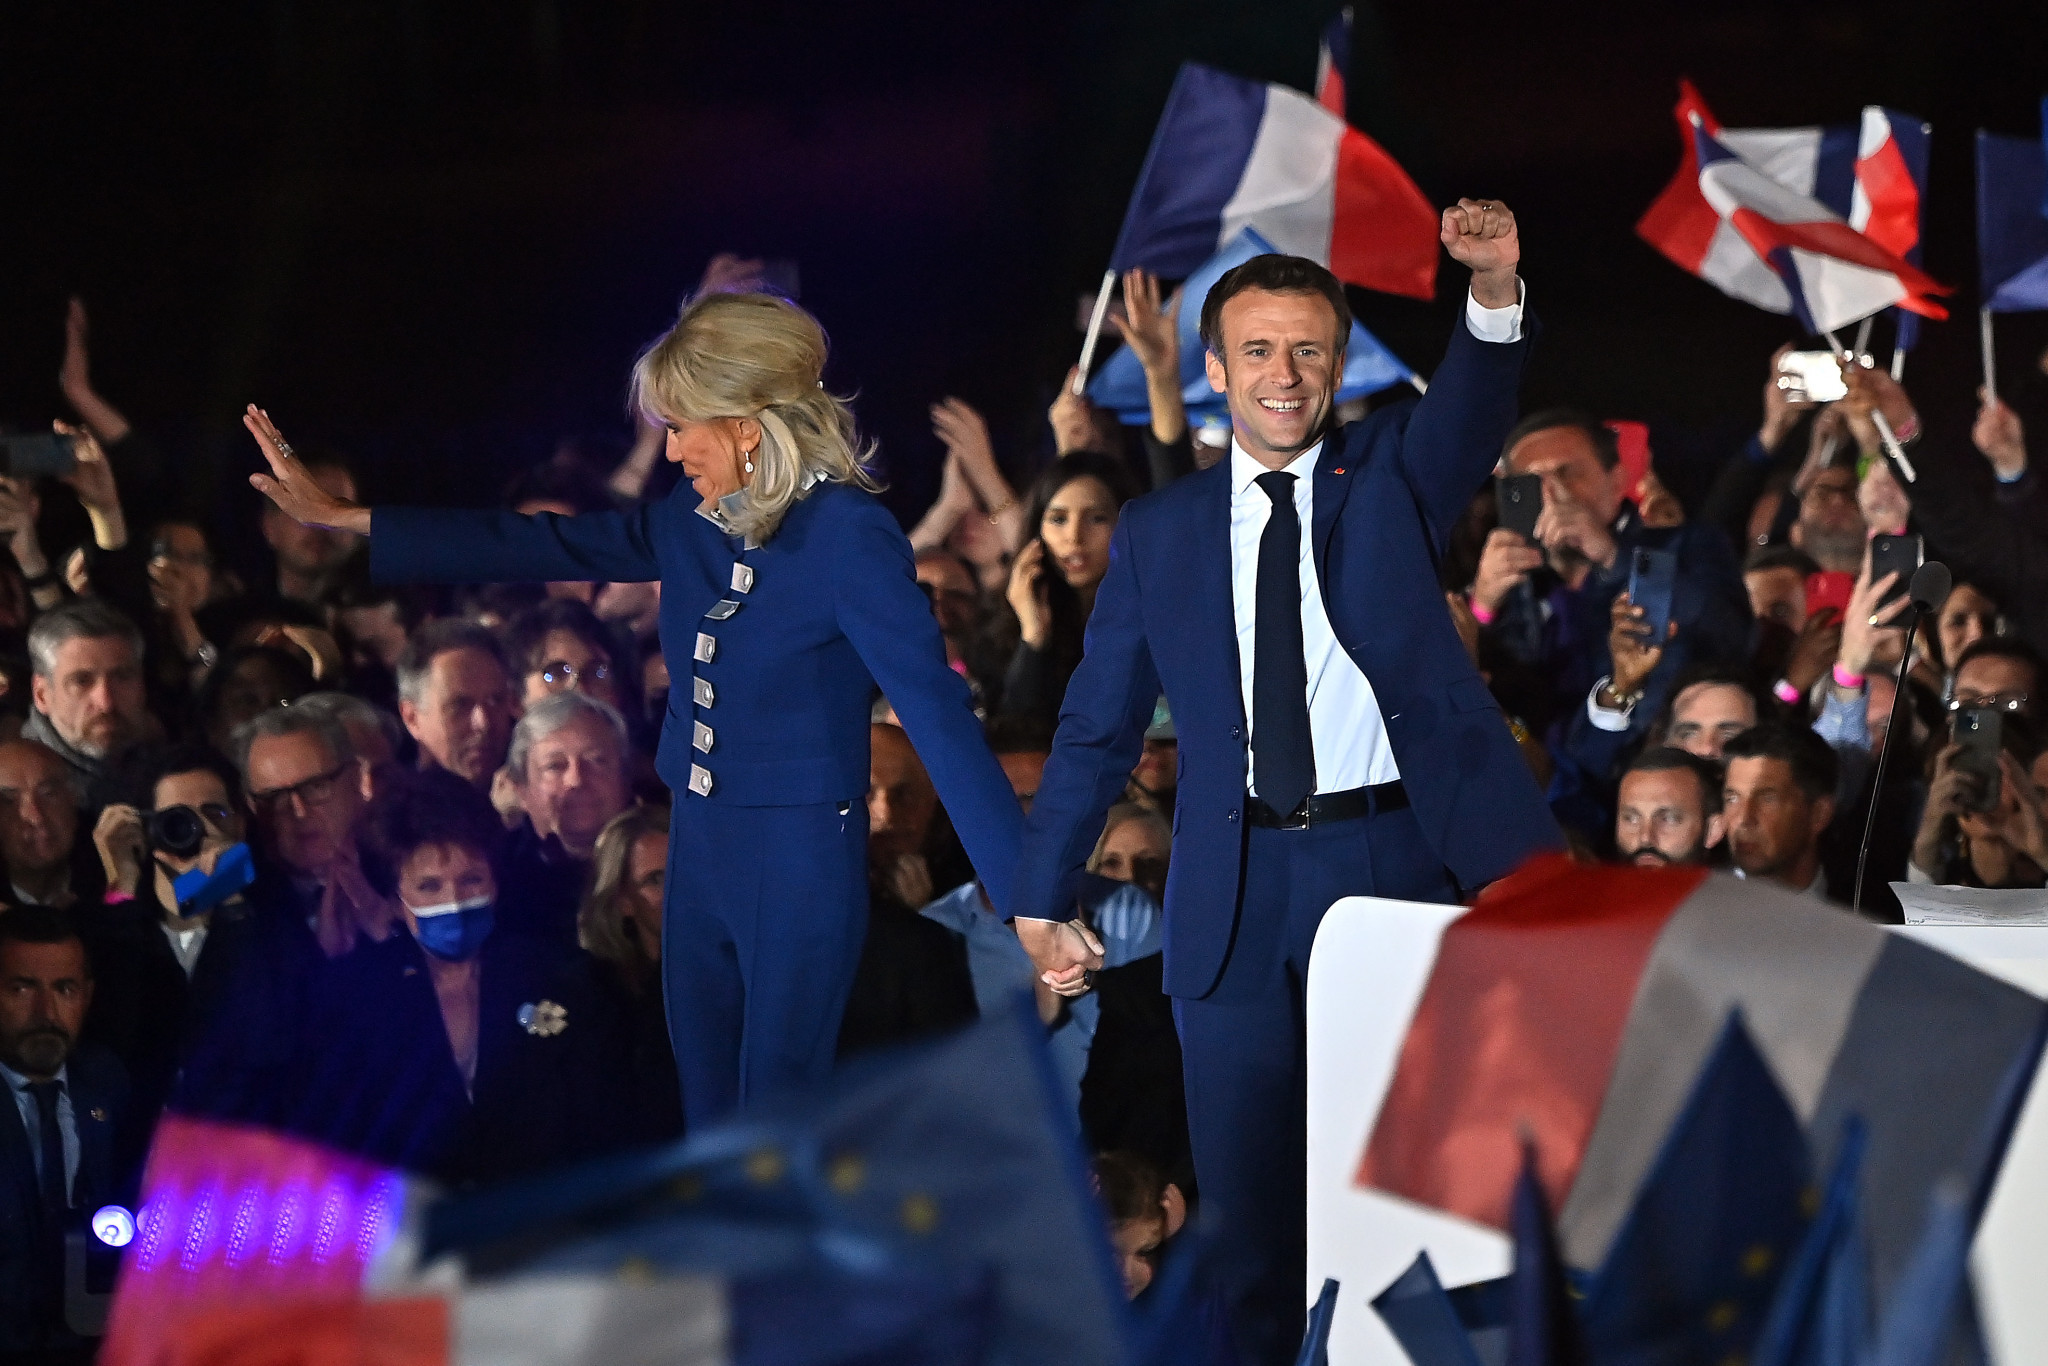 Emmanuel Macron, right, has been re-elected as President of France ©Getty Images